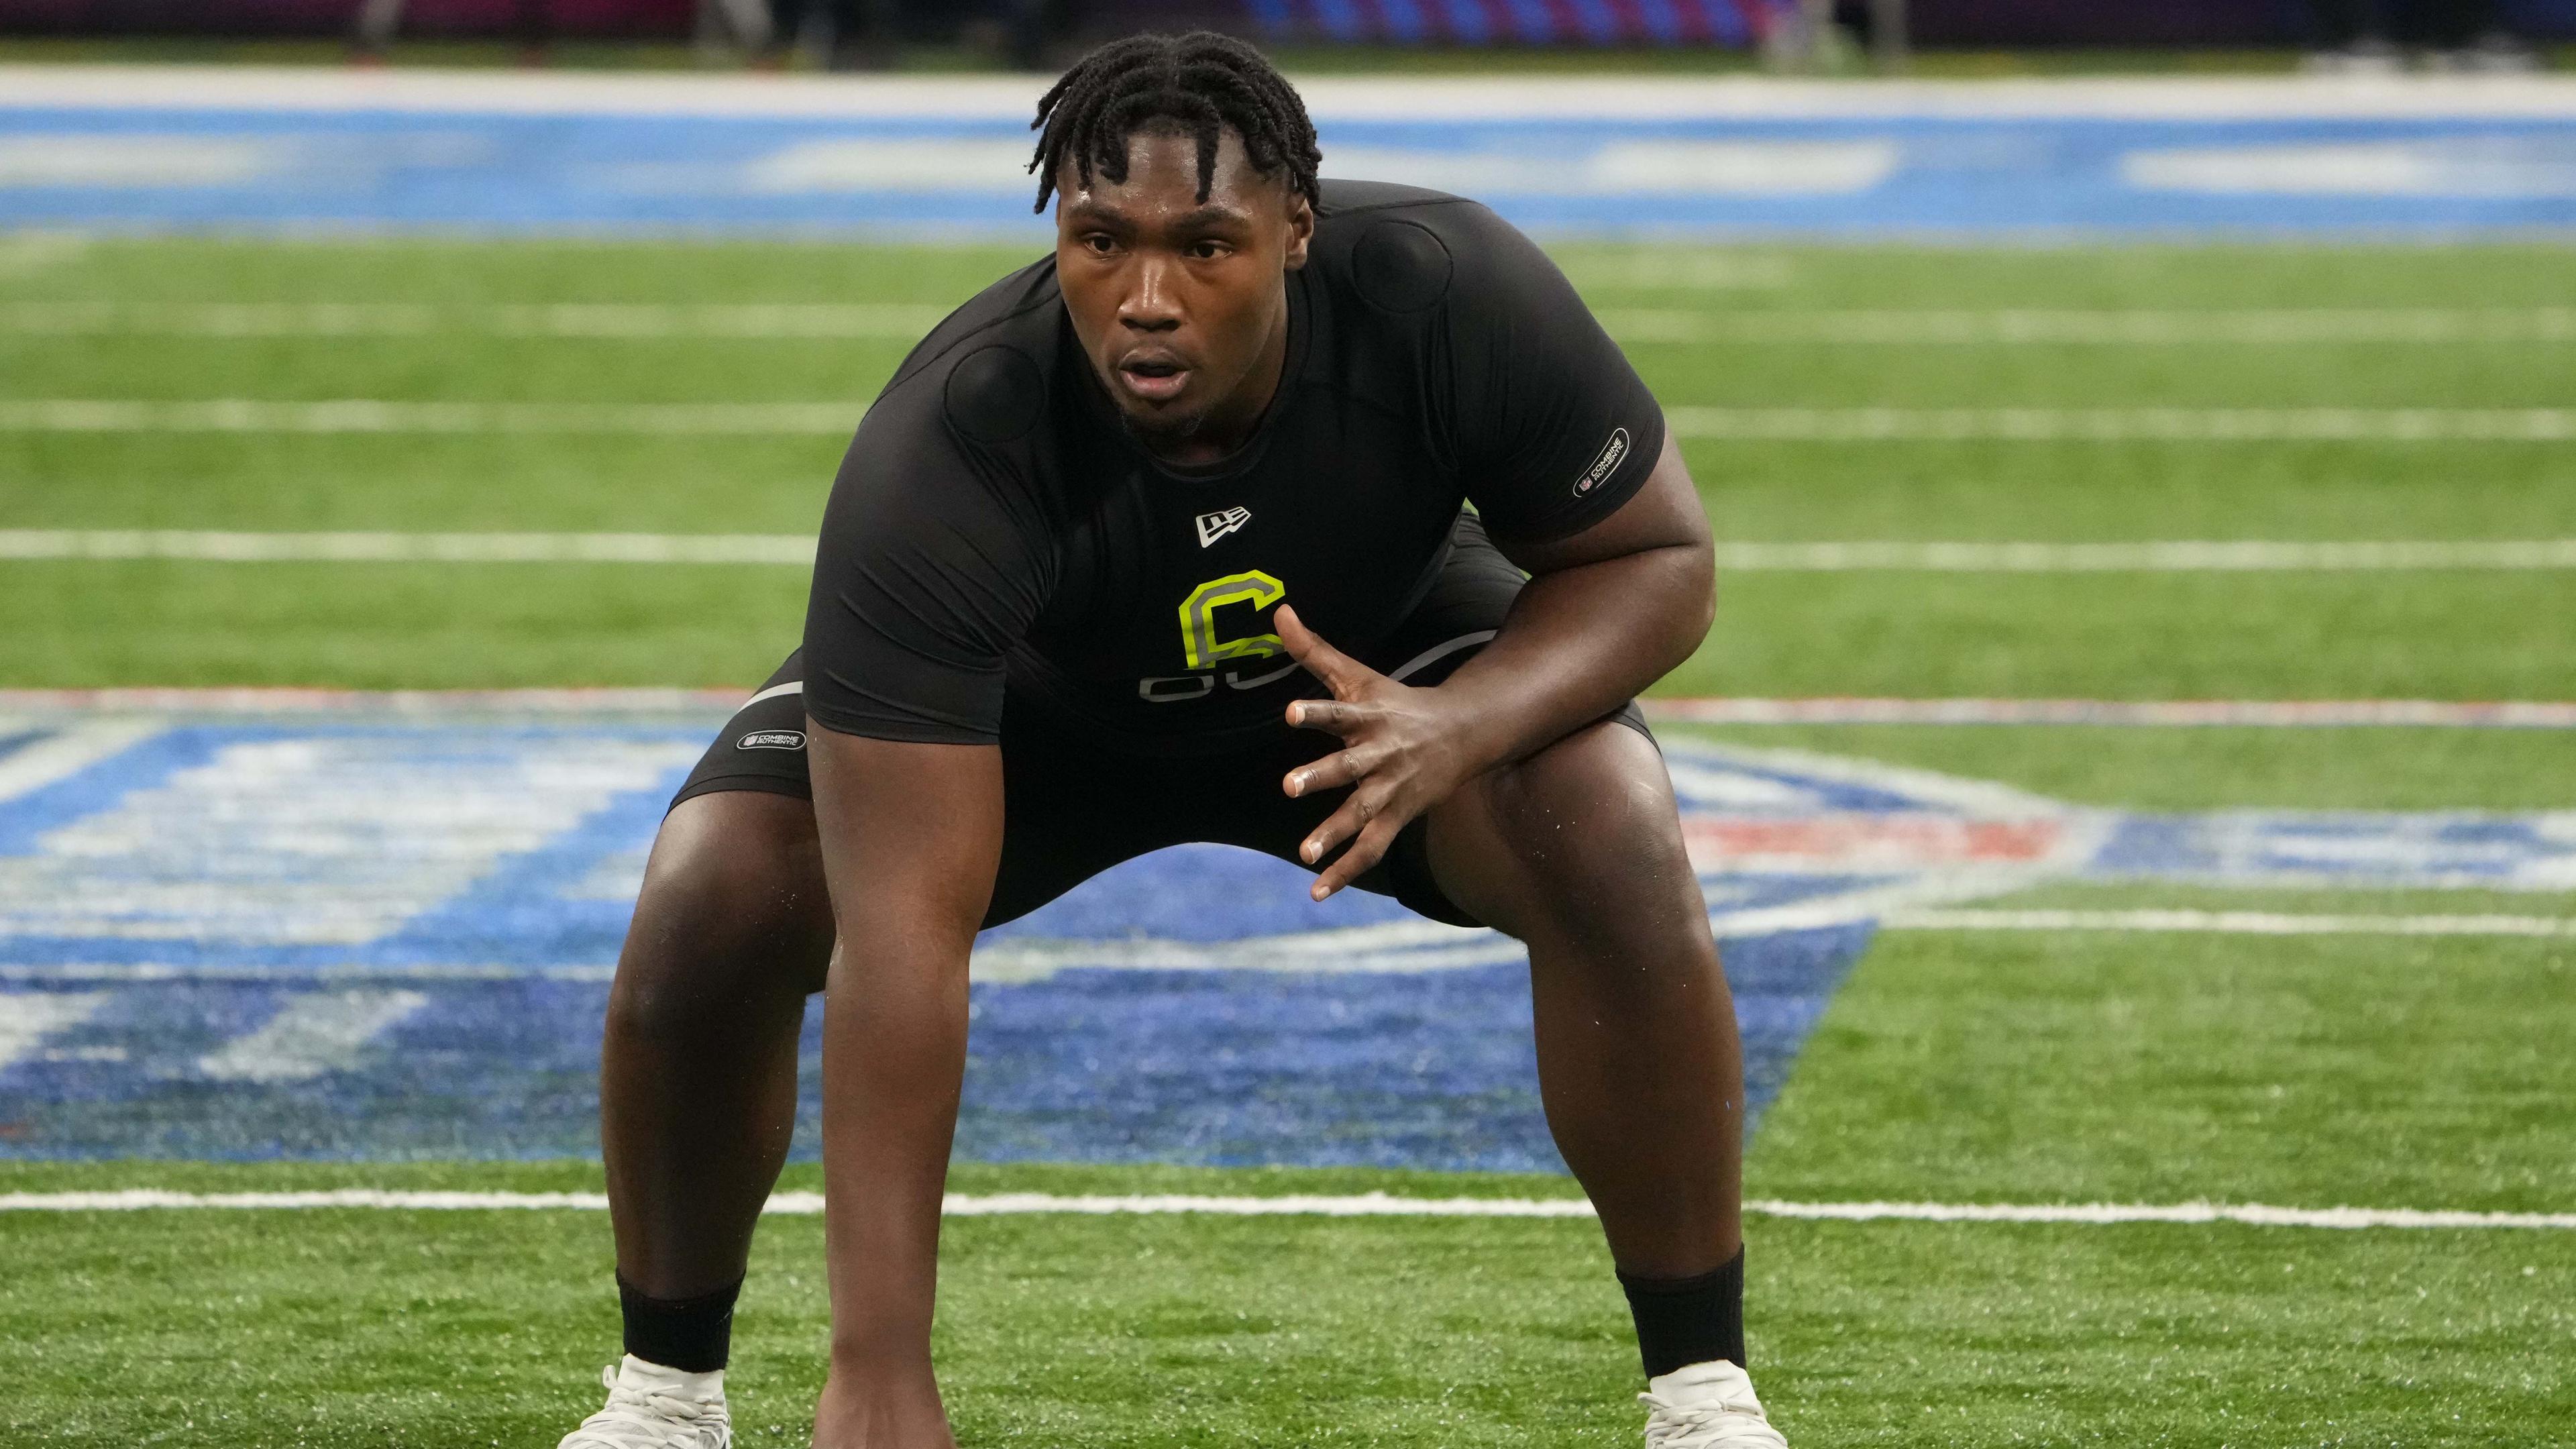 Mar 4, 2022; Indianapolis, IN, USA; Mississippi State offensive lineman Charles Cross (OL06) goes through drills during the 2022 NFL Scouting Combine at Lucas Oil Stadium. Mandatory Credit: Kirby Lee-USA TODAY Sports / Mandatory Credit: Kirby Lee-USA TODAY Sports